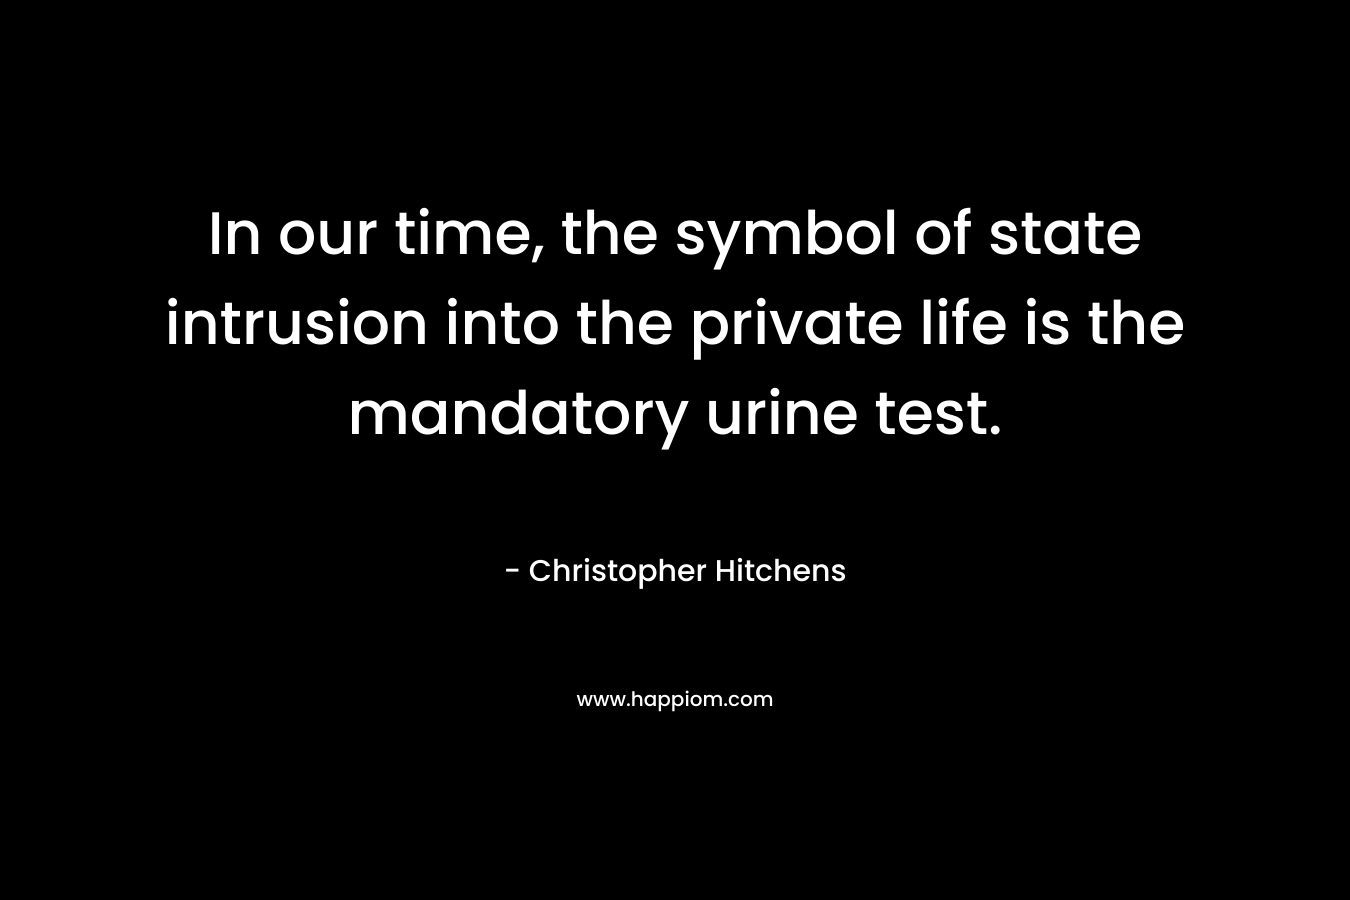 In our time, the symbol of state intrusion into the private life is the mandatory urine test. – Christopher Hitchens